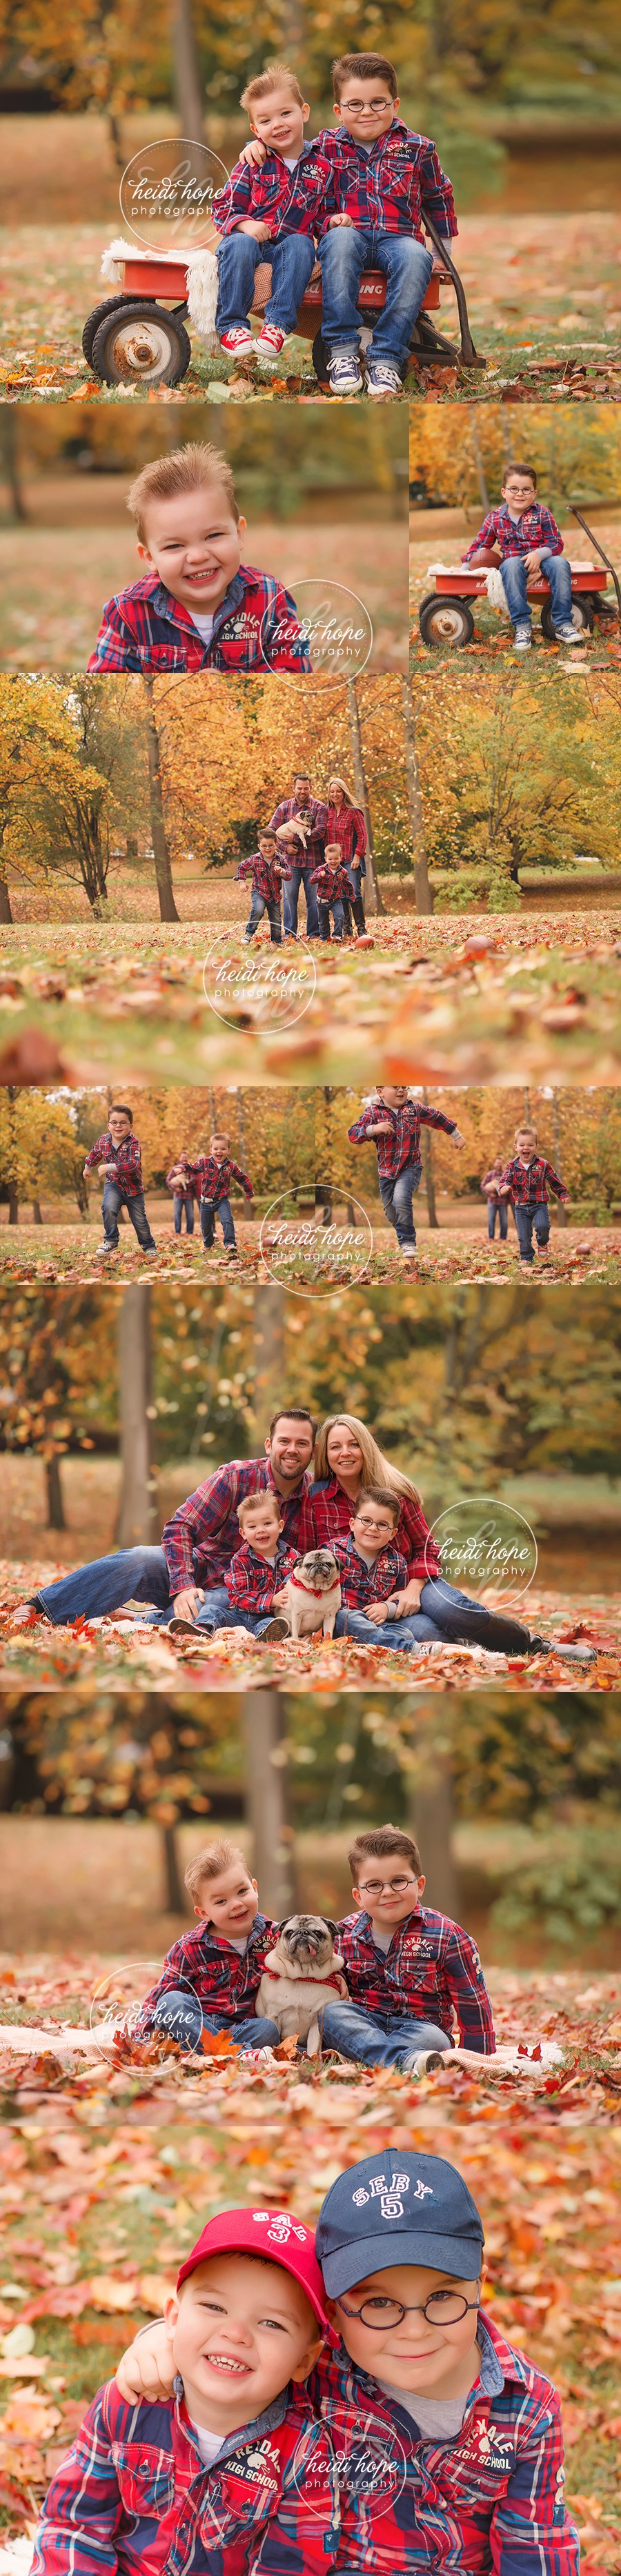 newengland fall family photo session with autumn foliage